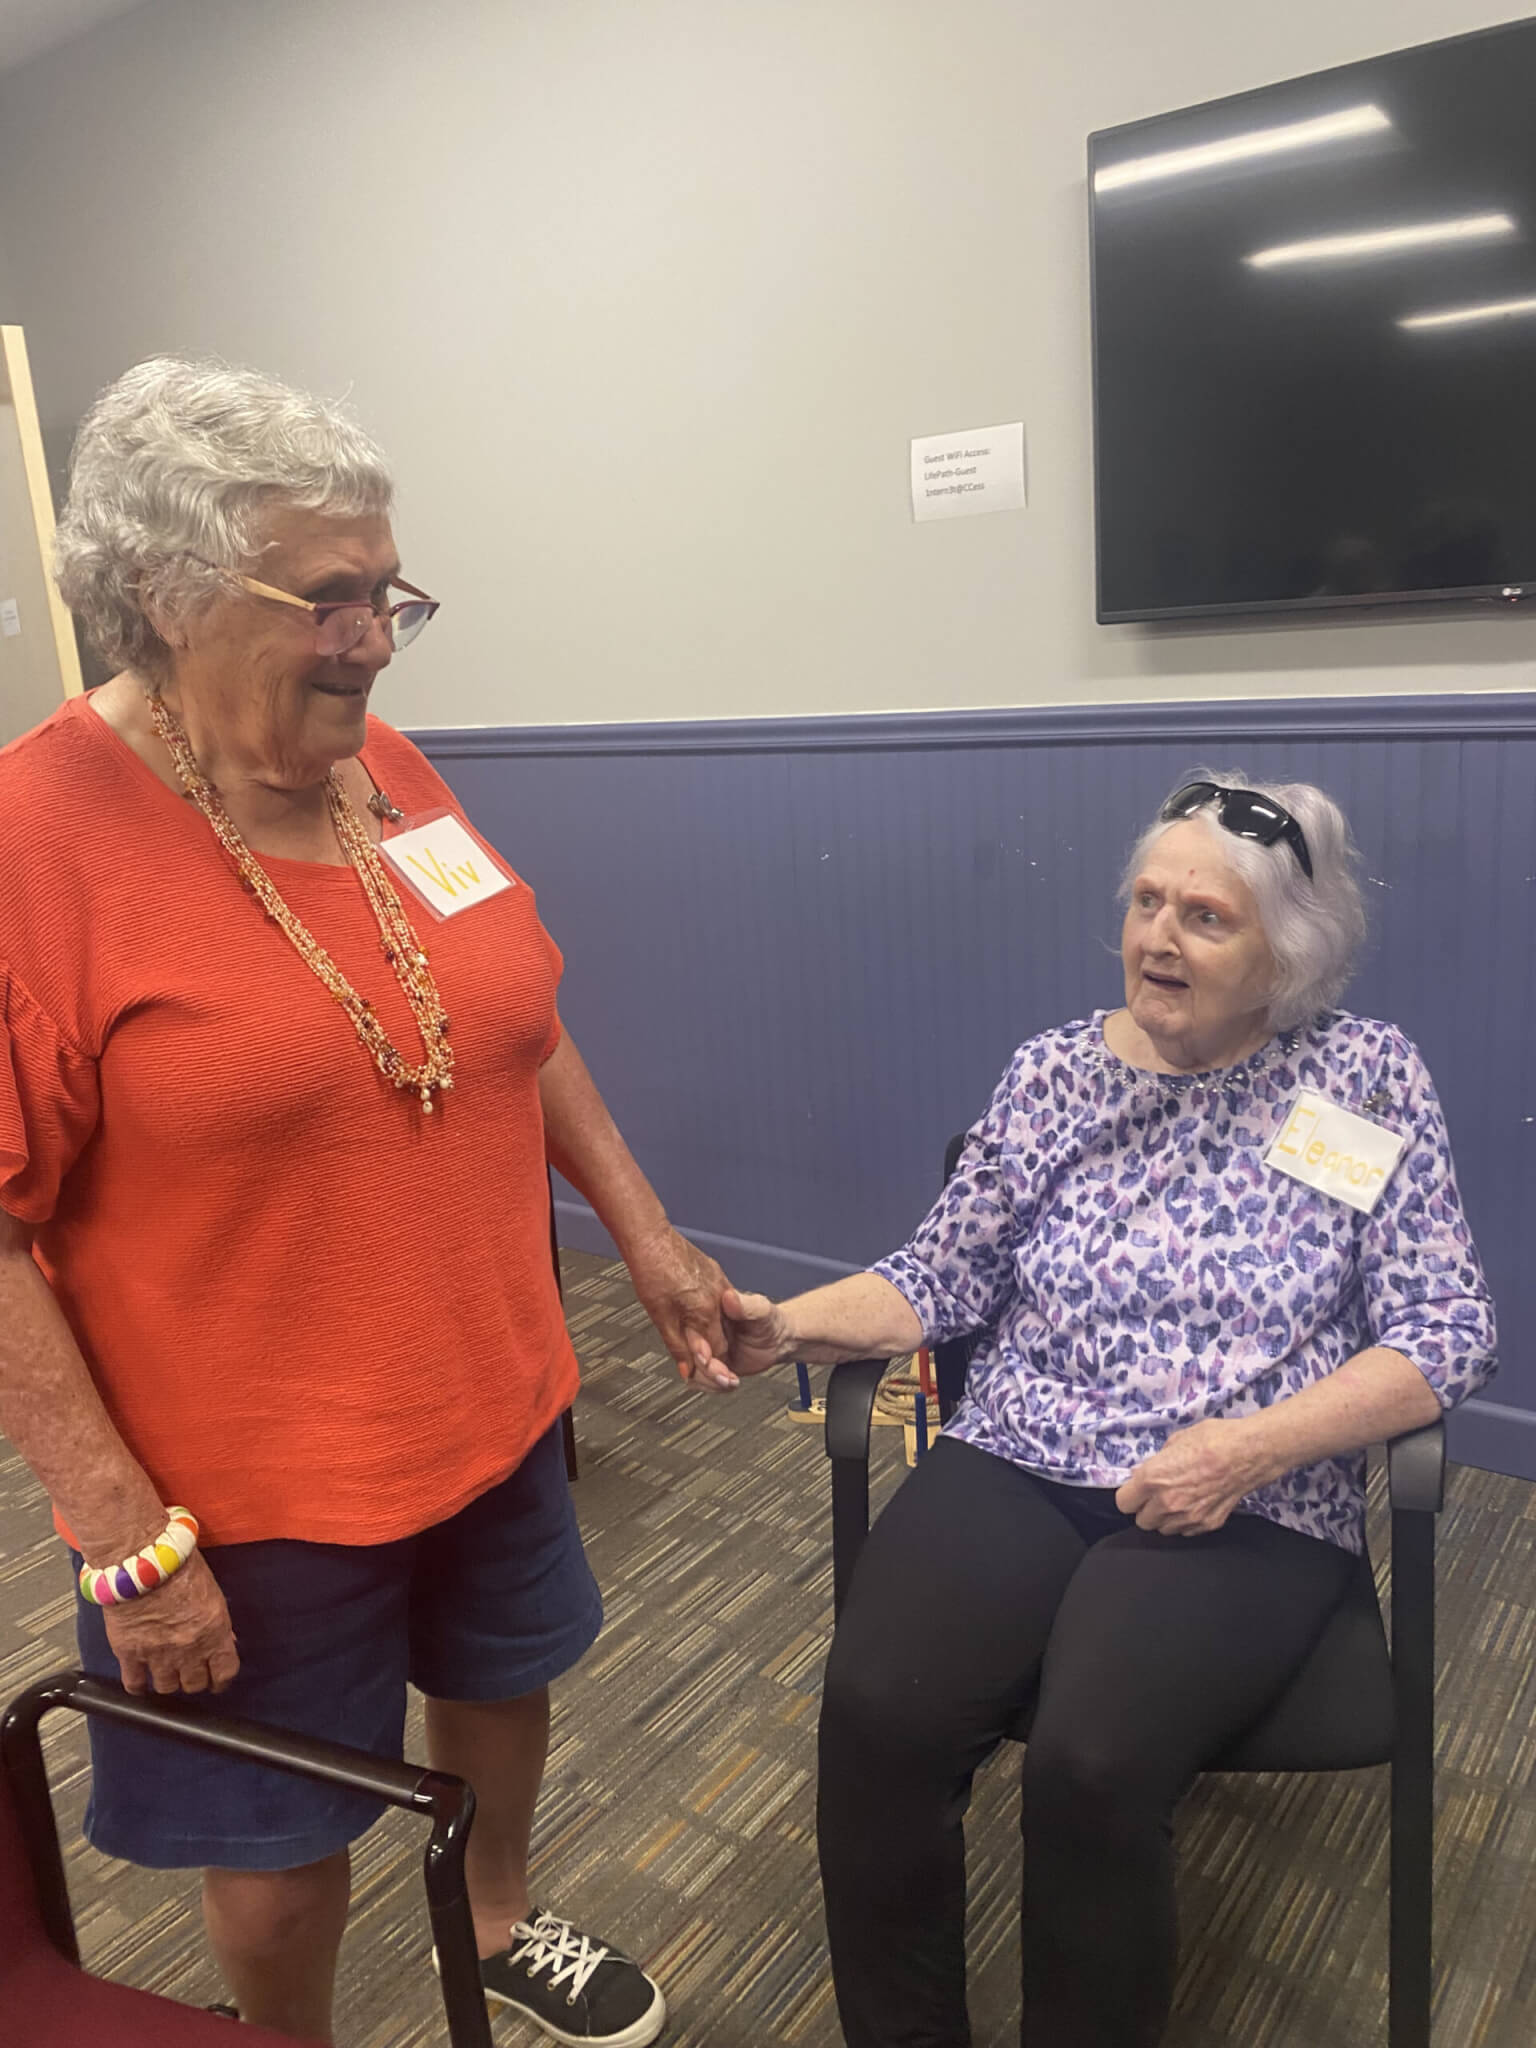 standing older woman greeting sitting older woman at CEC